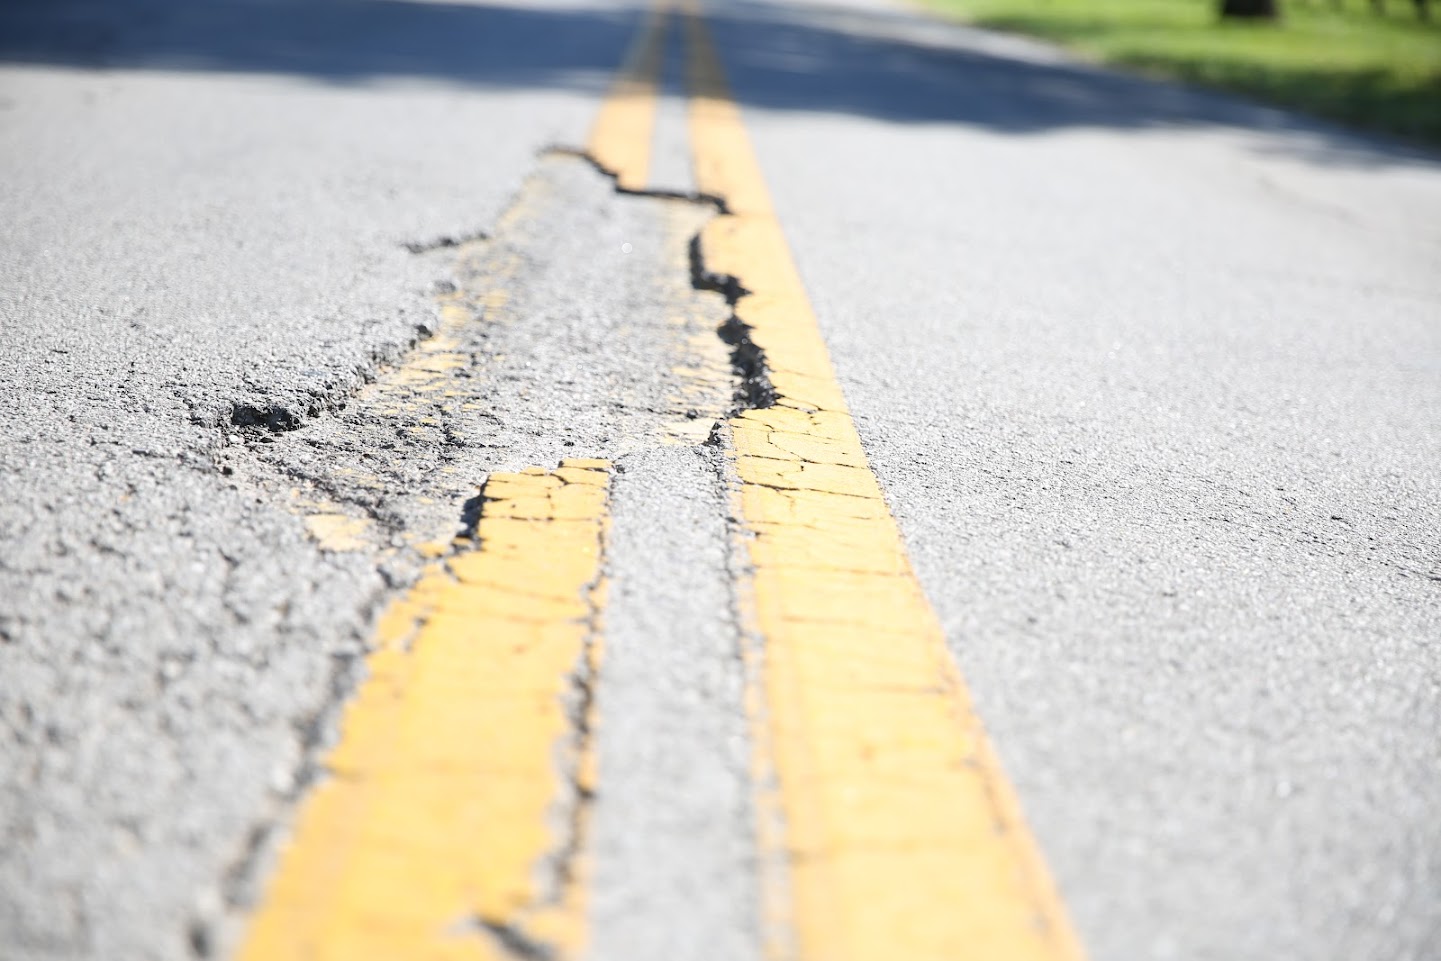 photo of cracked double yellow line roadway paint